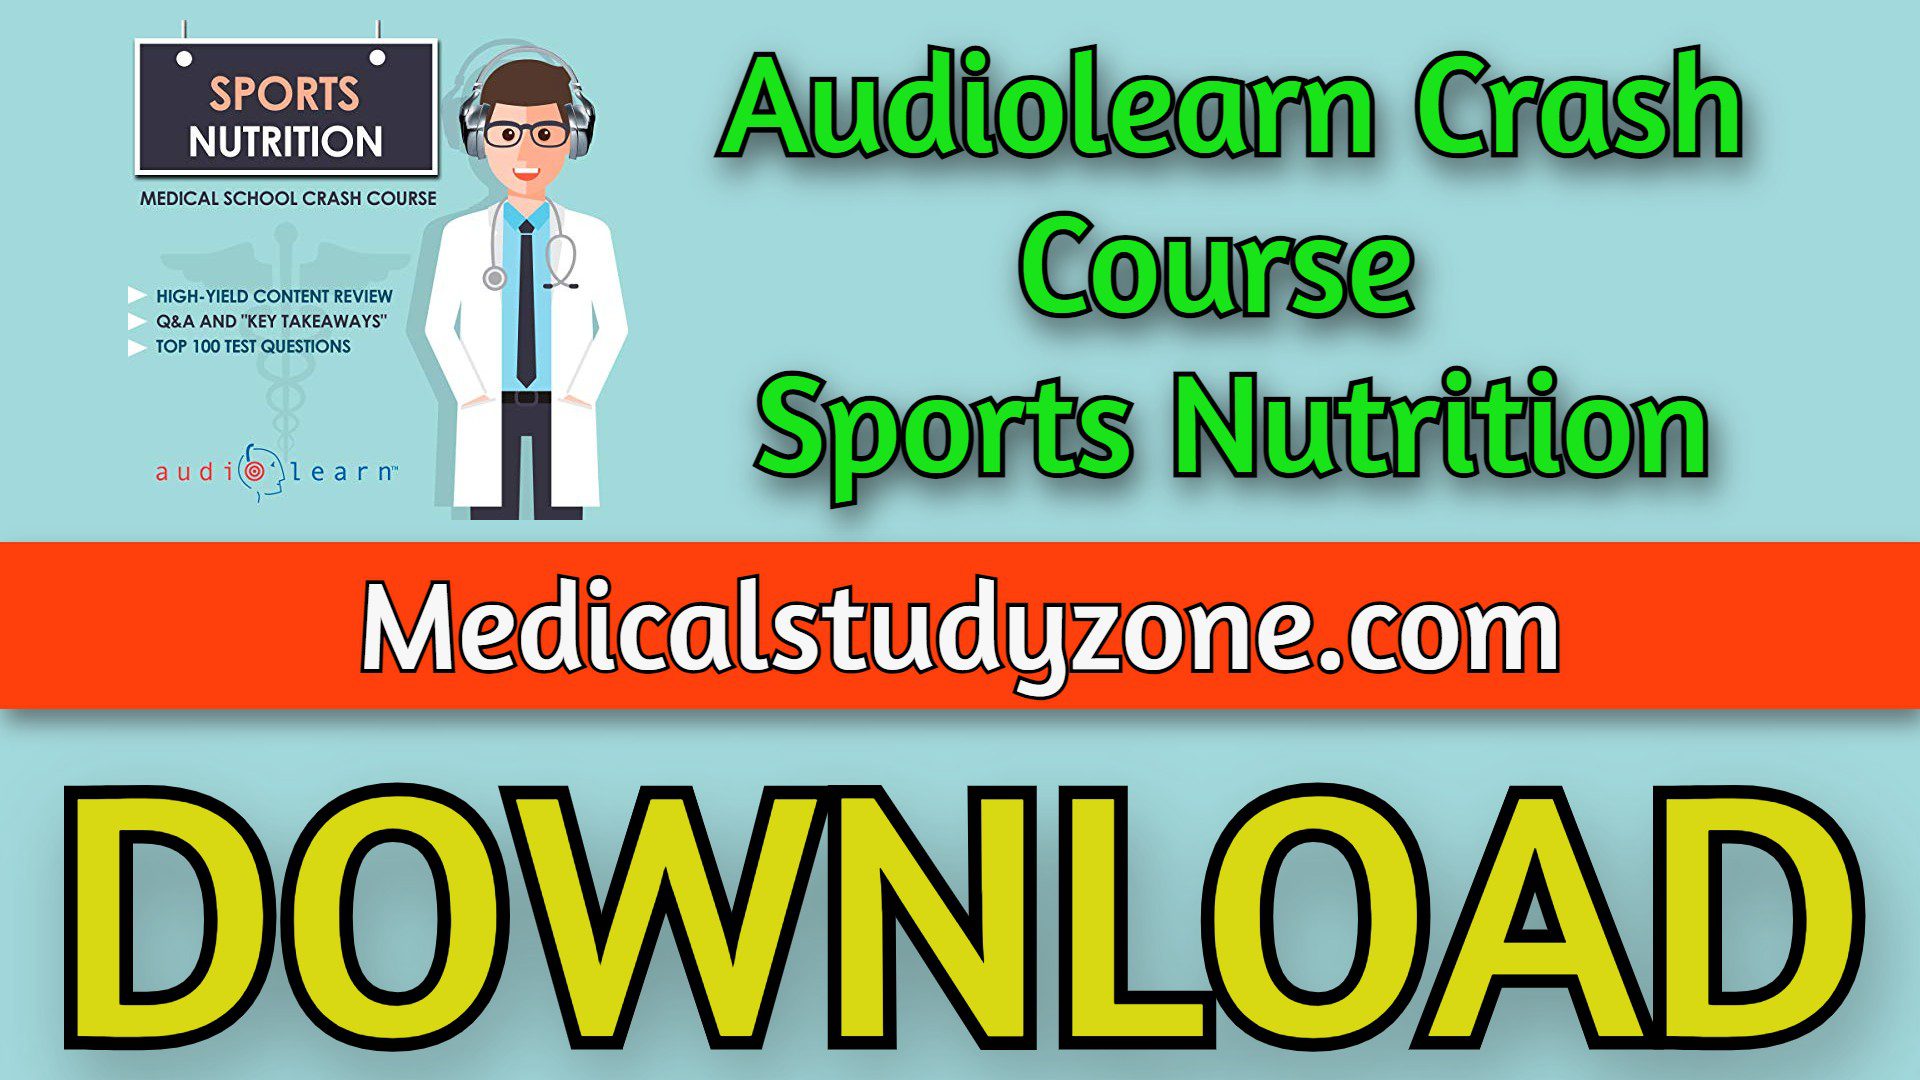 Audiolearn Crash Course Sports Nutrition 2021 Free Download